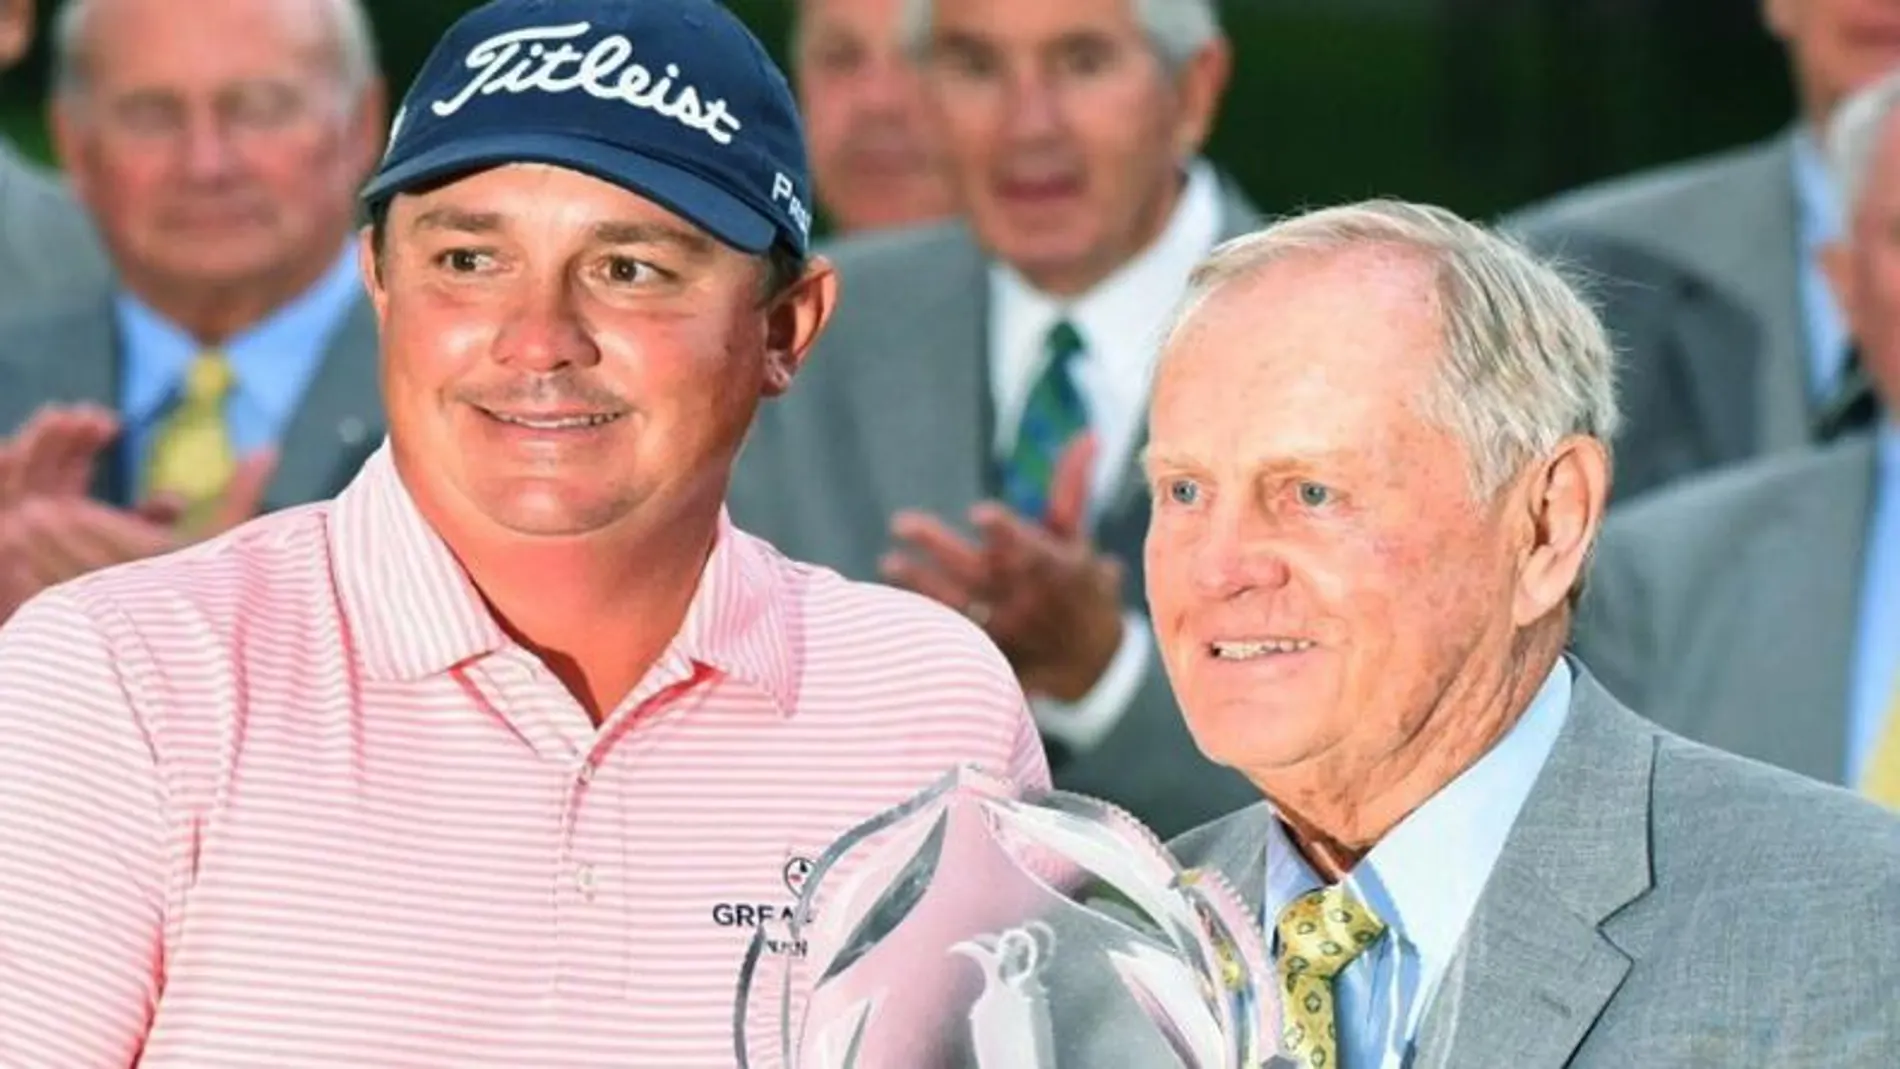 Jason Dufner con Phil Mickelson